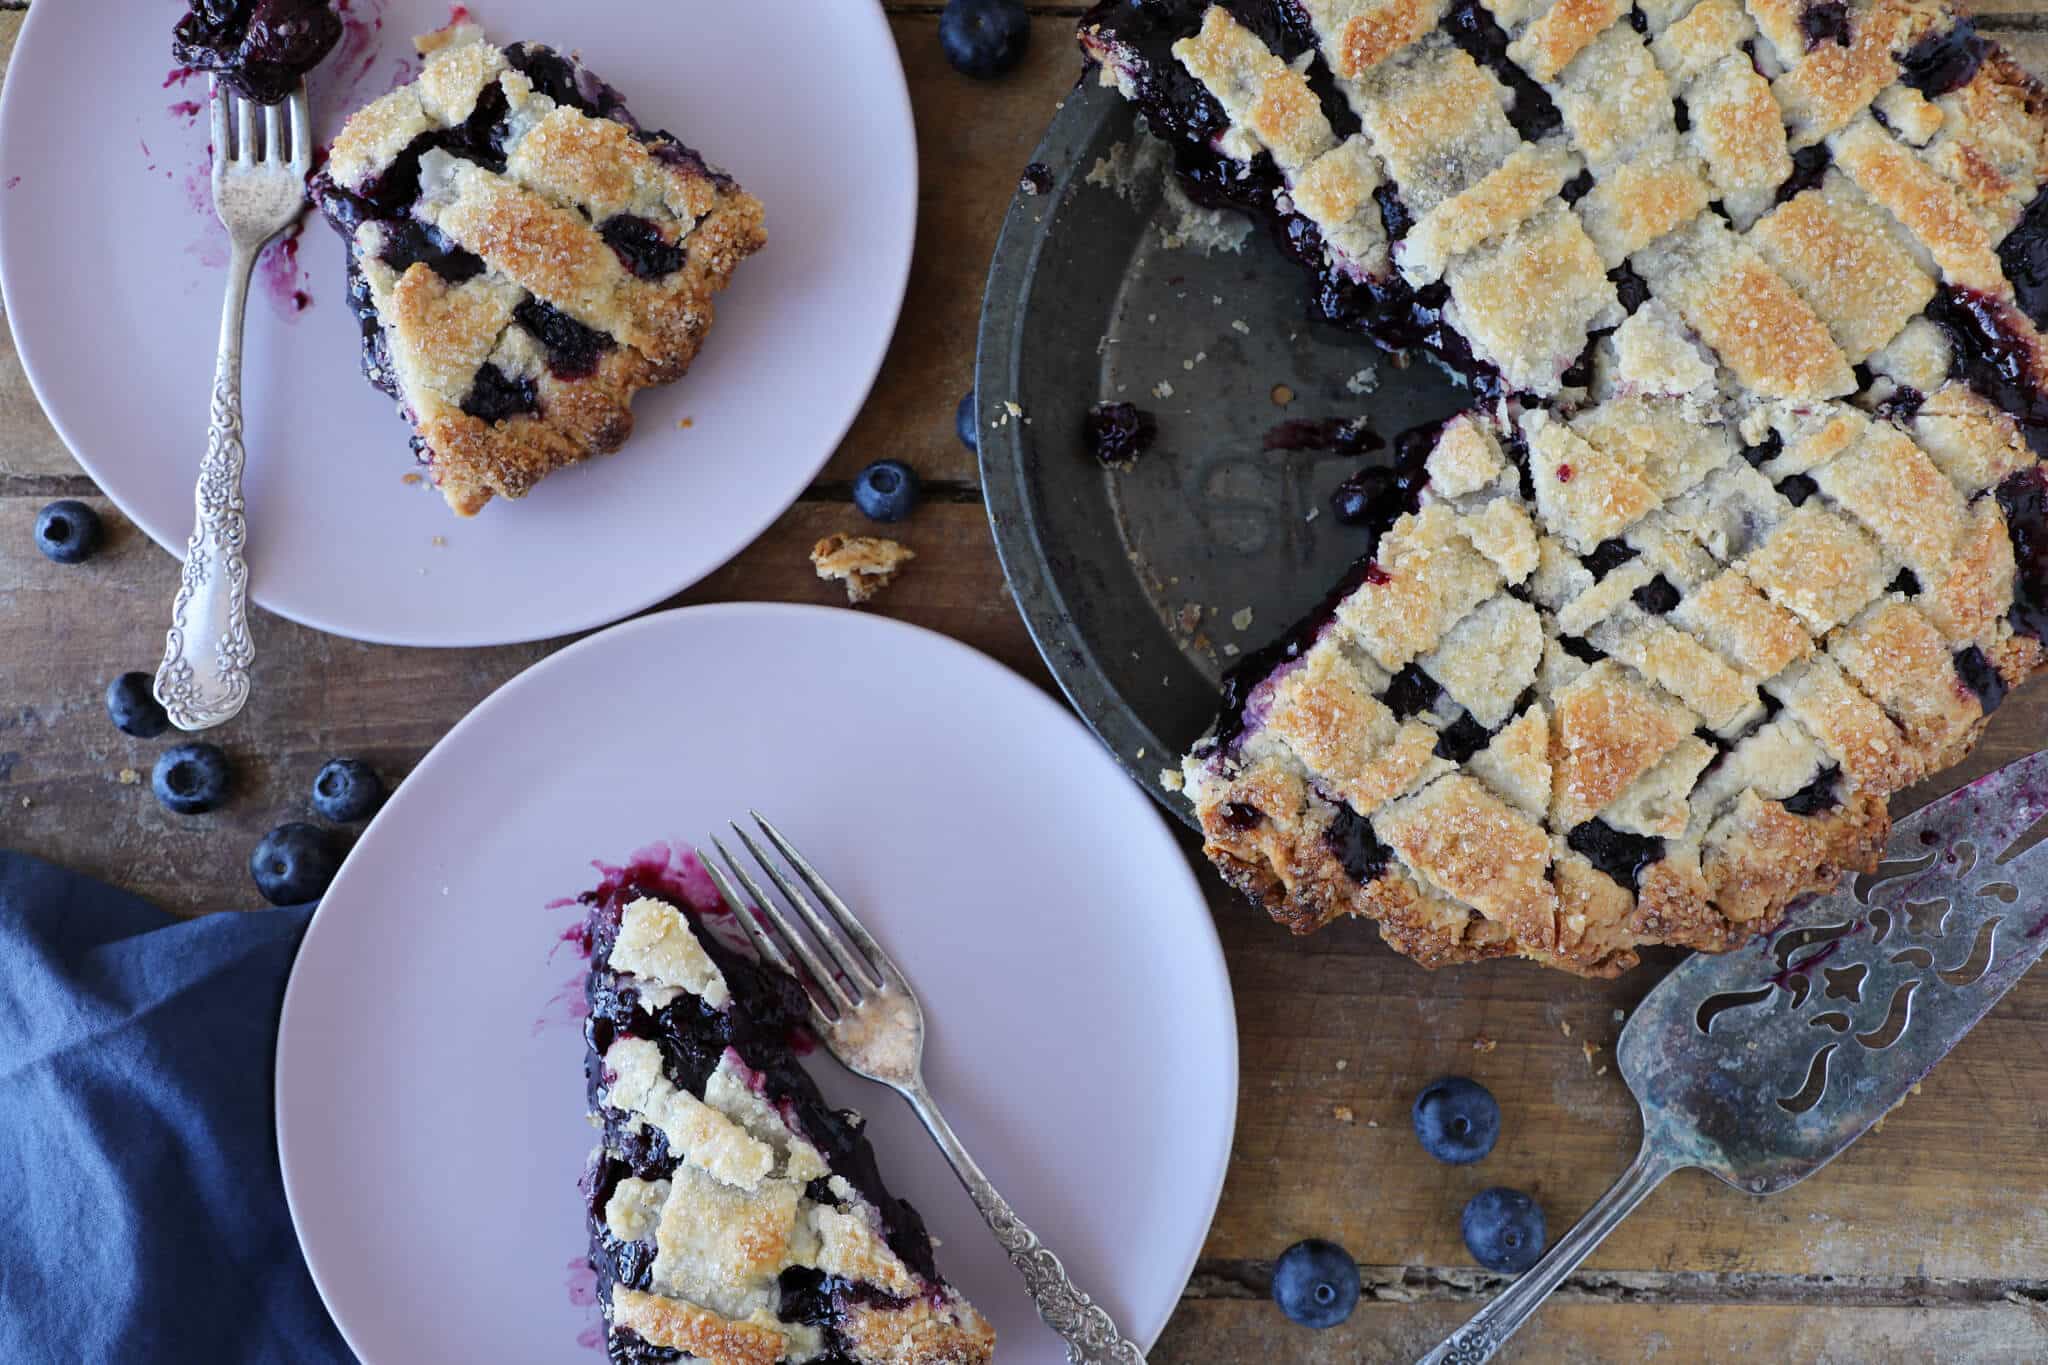 Two servings of blueberry pie next to a whole blueberry pie on a wood surface.